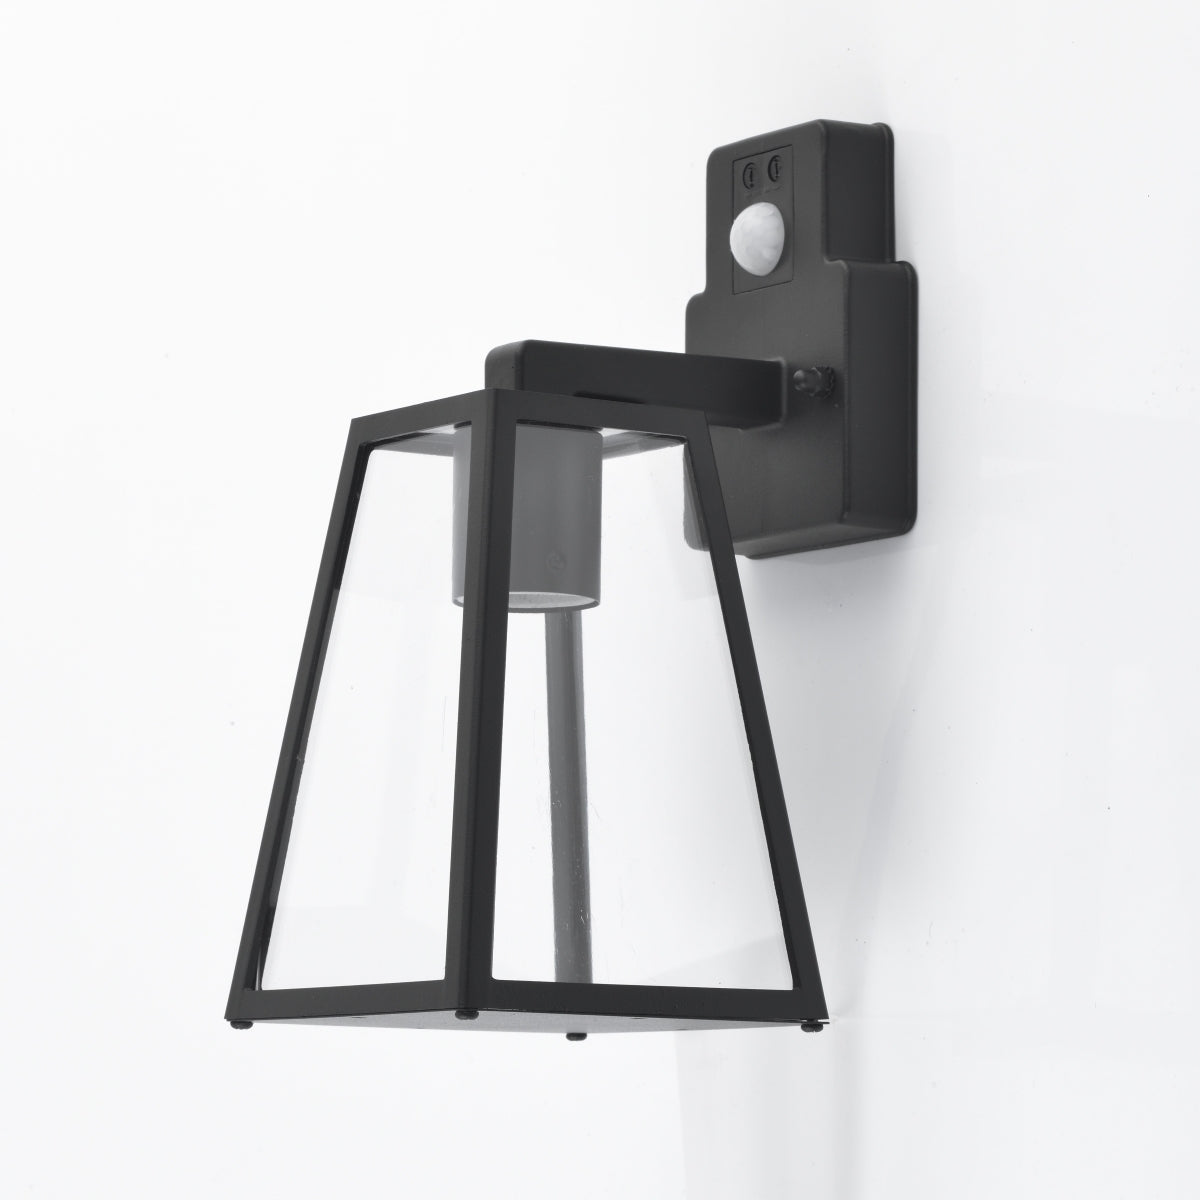 If you’re looking for a modern take on a traditional outdoor wall light, this black aluminium triangular wall light is perfect for adding style and protection for your home. This classic design with a contemporary twist, styled with a metal triangle shape and fitted with clear diffusers<span style="font-weight: 400;" data-mce-fragment="1" data-mce-style="font-weight: 400;"> also contains an imposing black finish, making it ideal for any home design - adding a statement to any wall it fits in</span>